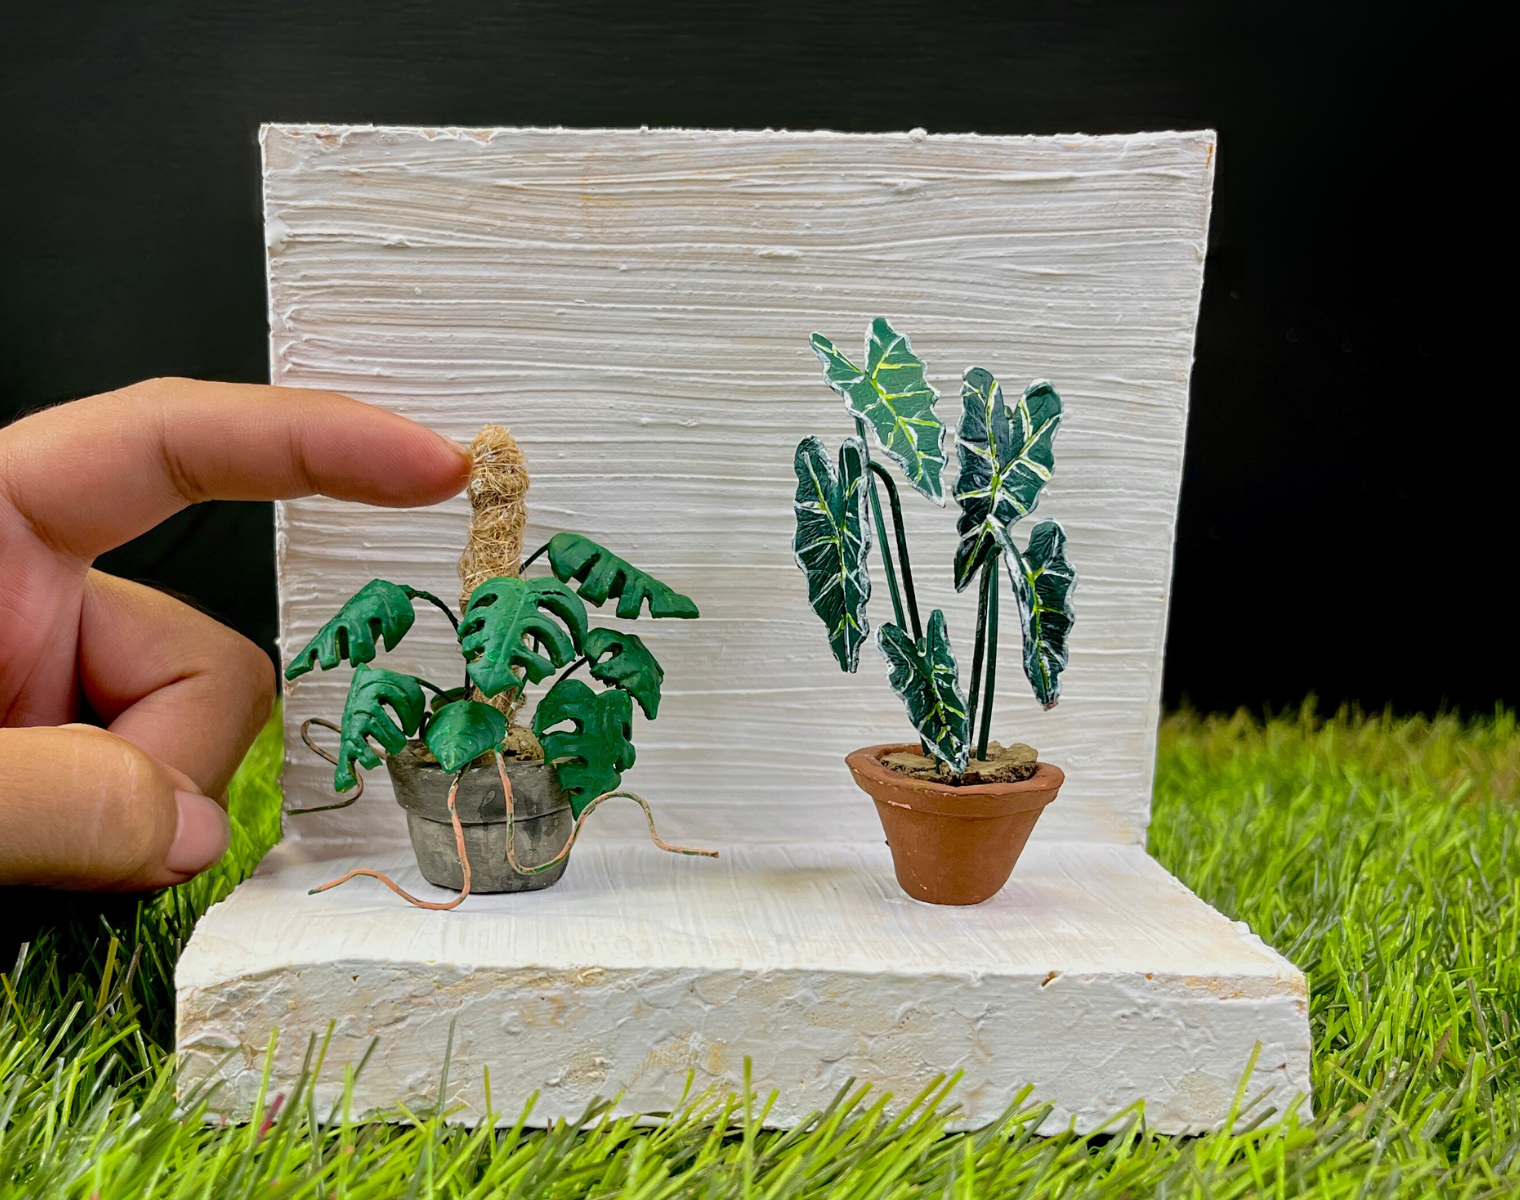 Mini Plant - Perfect for Your Miniature Balcony Garden Using Clay!